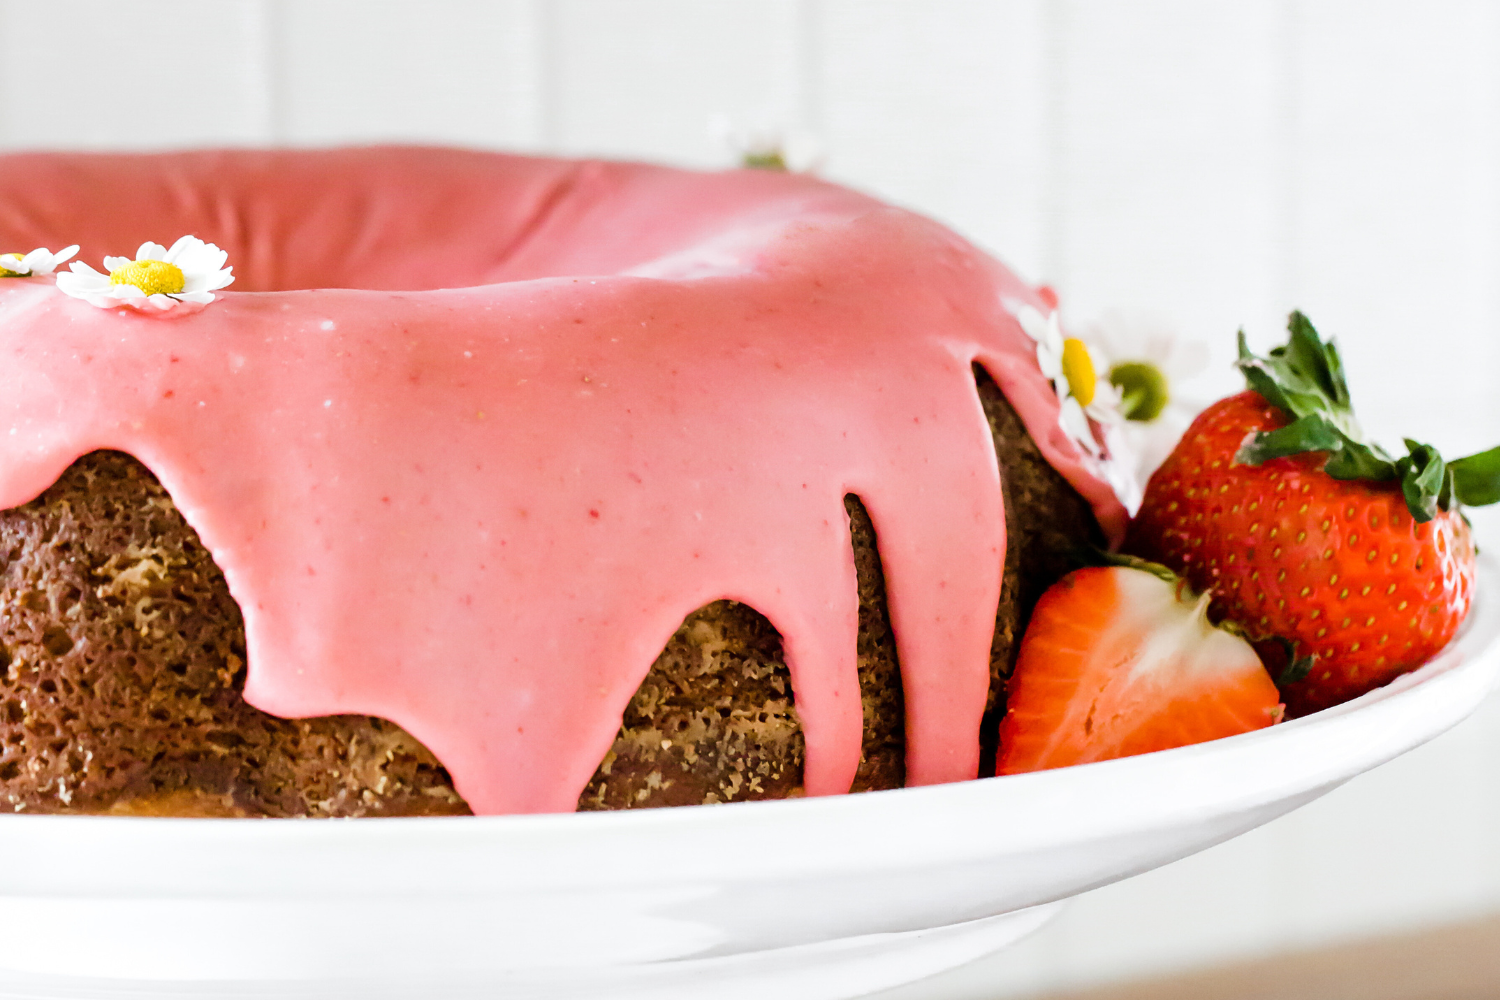 the full strawberry bundt cake on a plate.